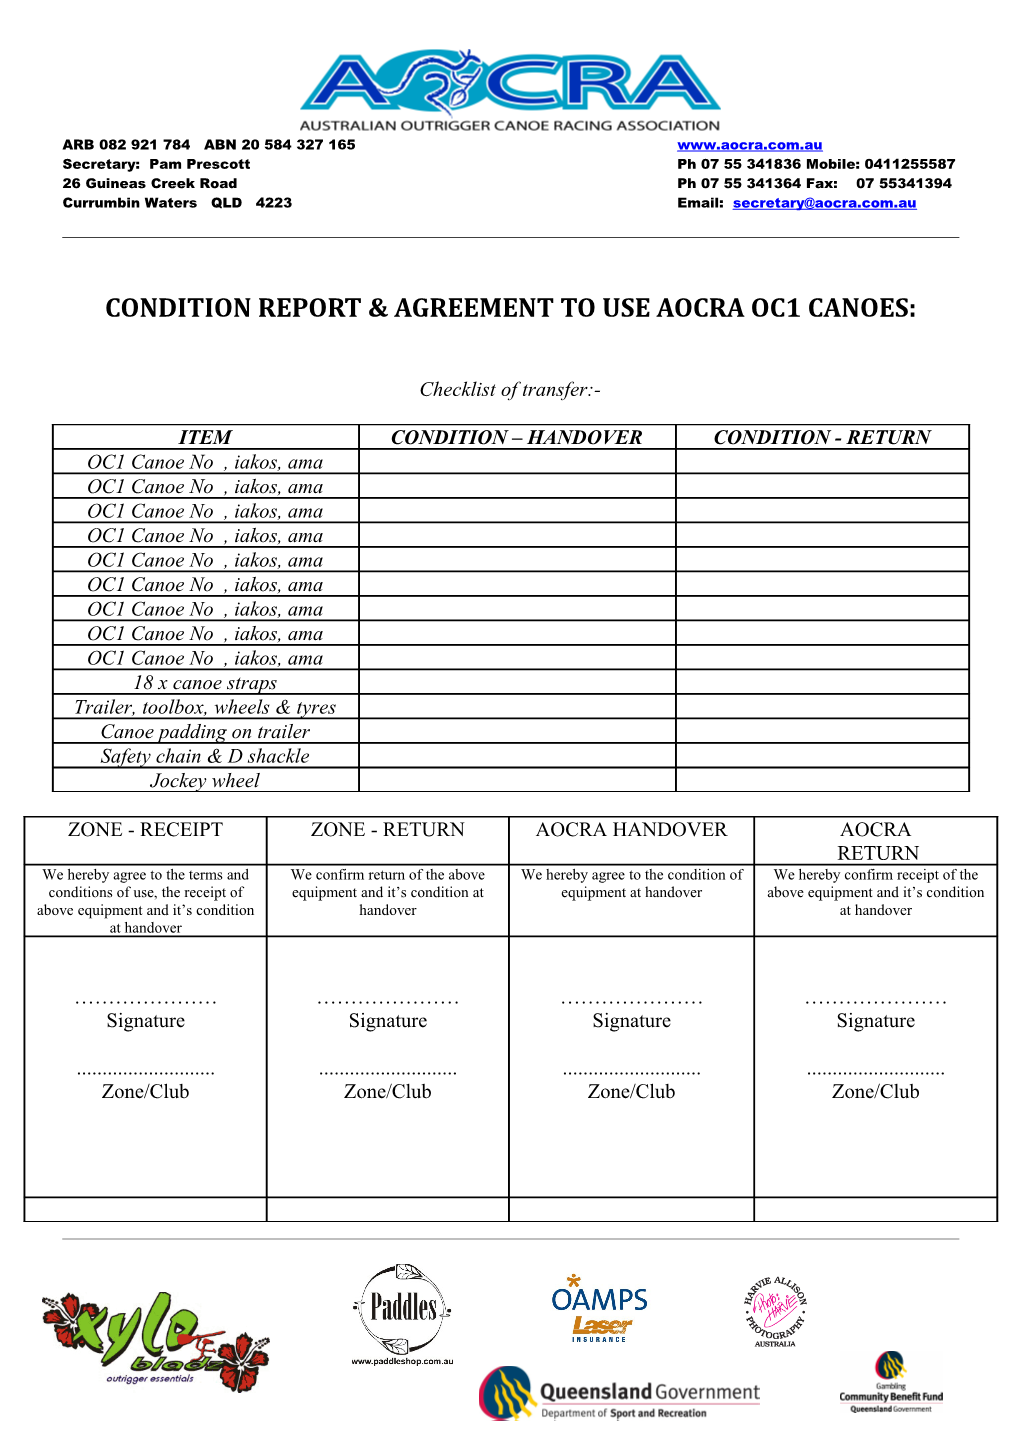 Condition Report & Agreement to Use Zone Irb